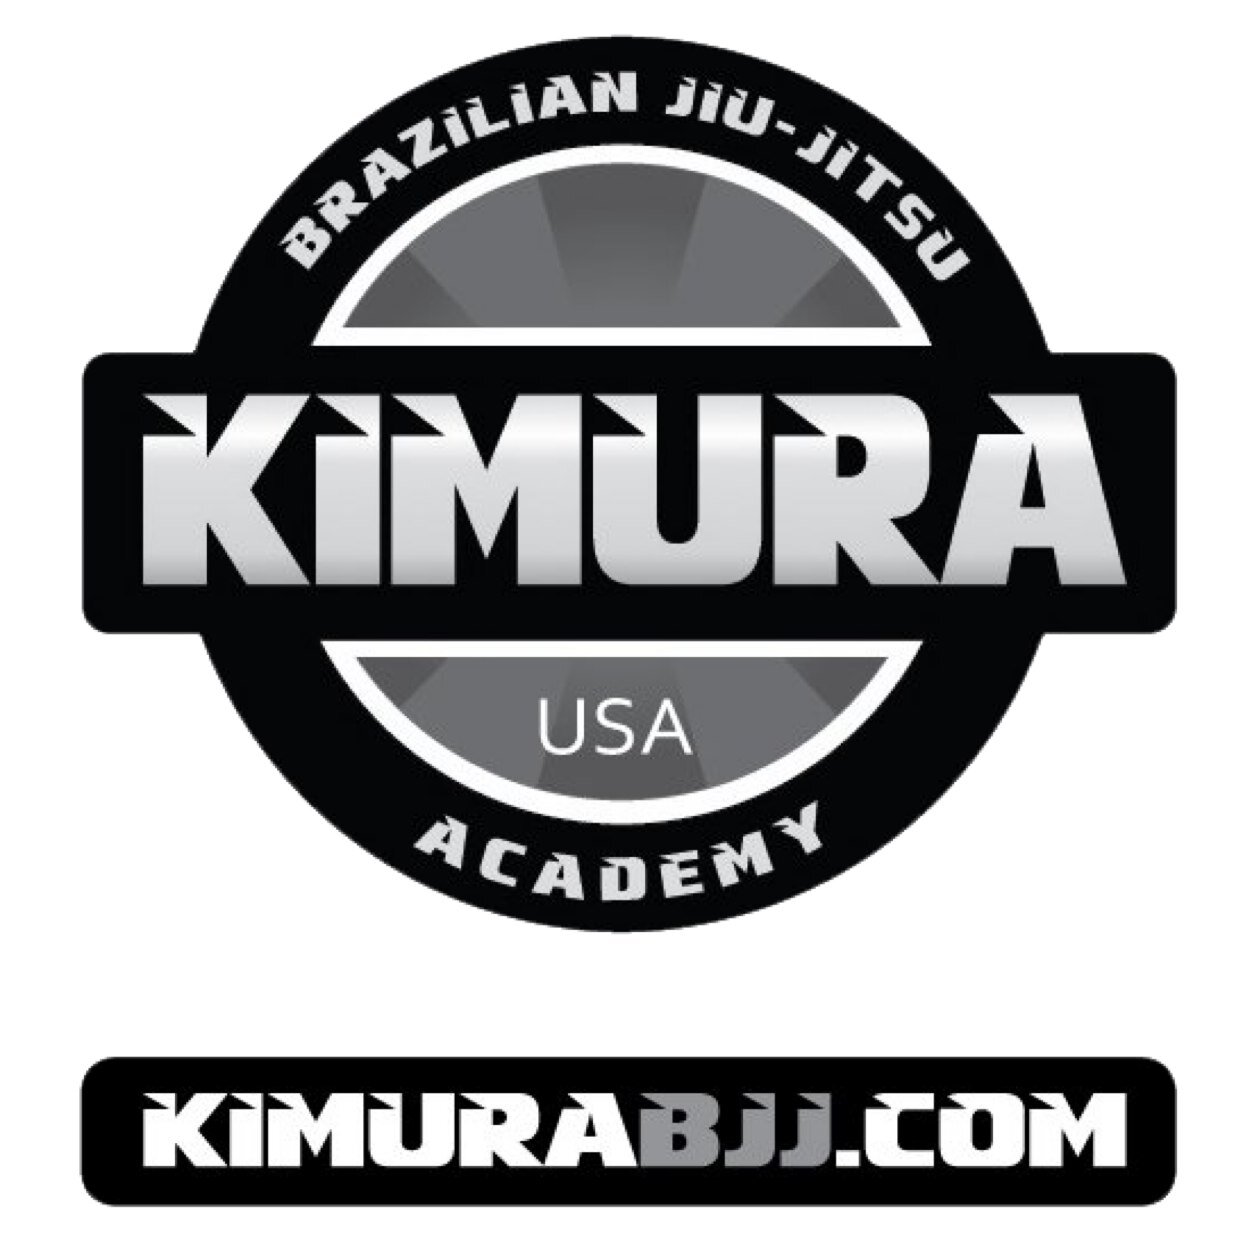 With a natural gift for teaching, Bill brings a lifetime of experience to his Kimura students as an instructor at Kimura BJJ Tewksbury.